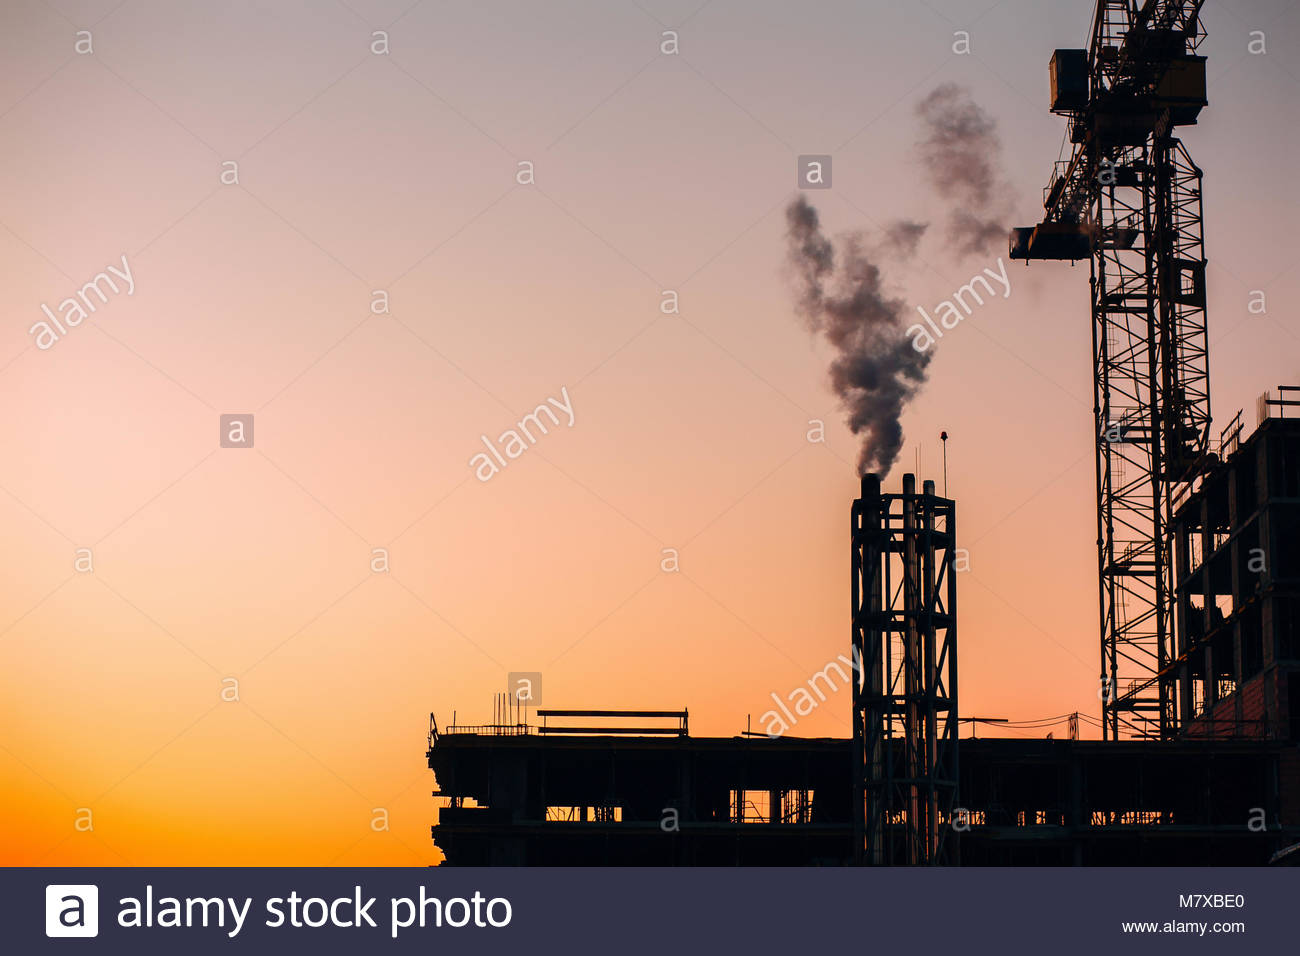 Crane And Building Construction Site With Pipe Smoke On Stock